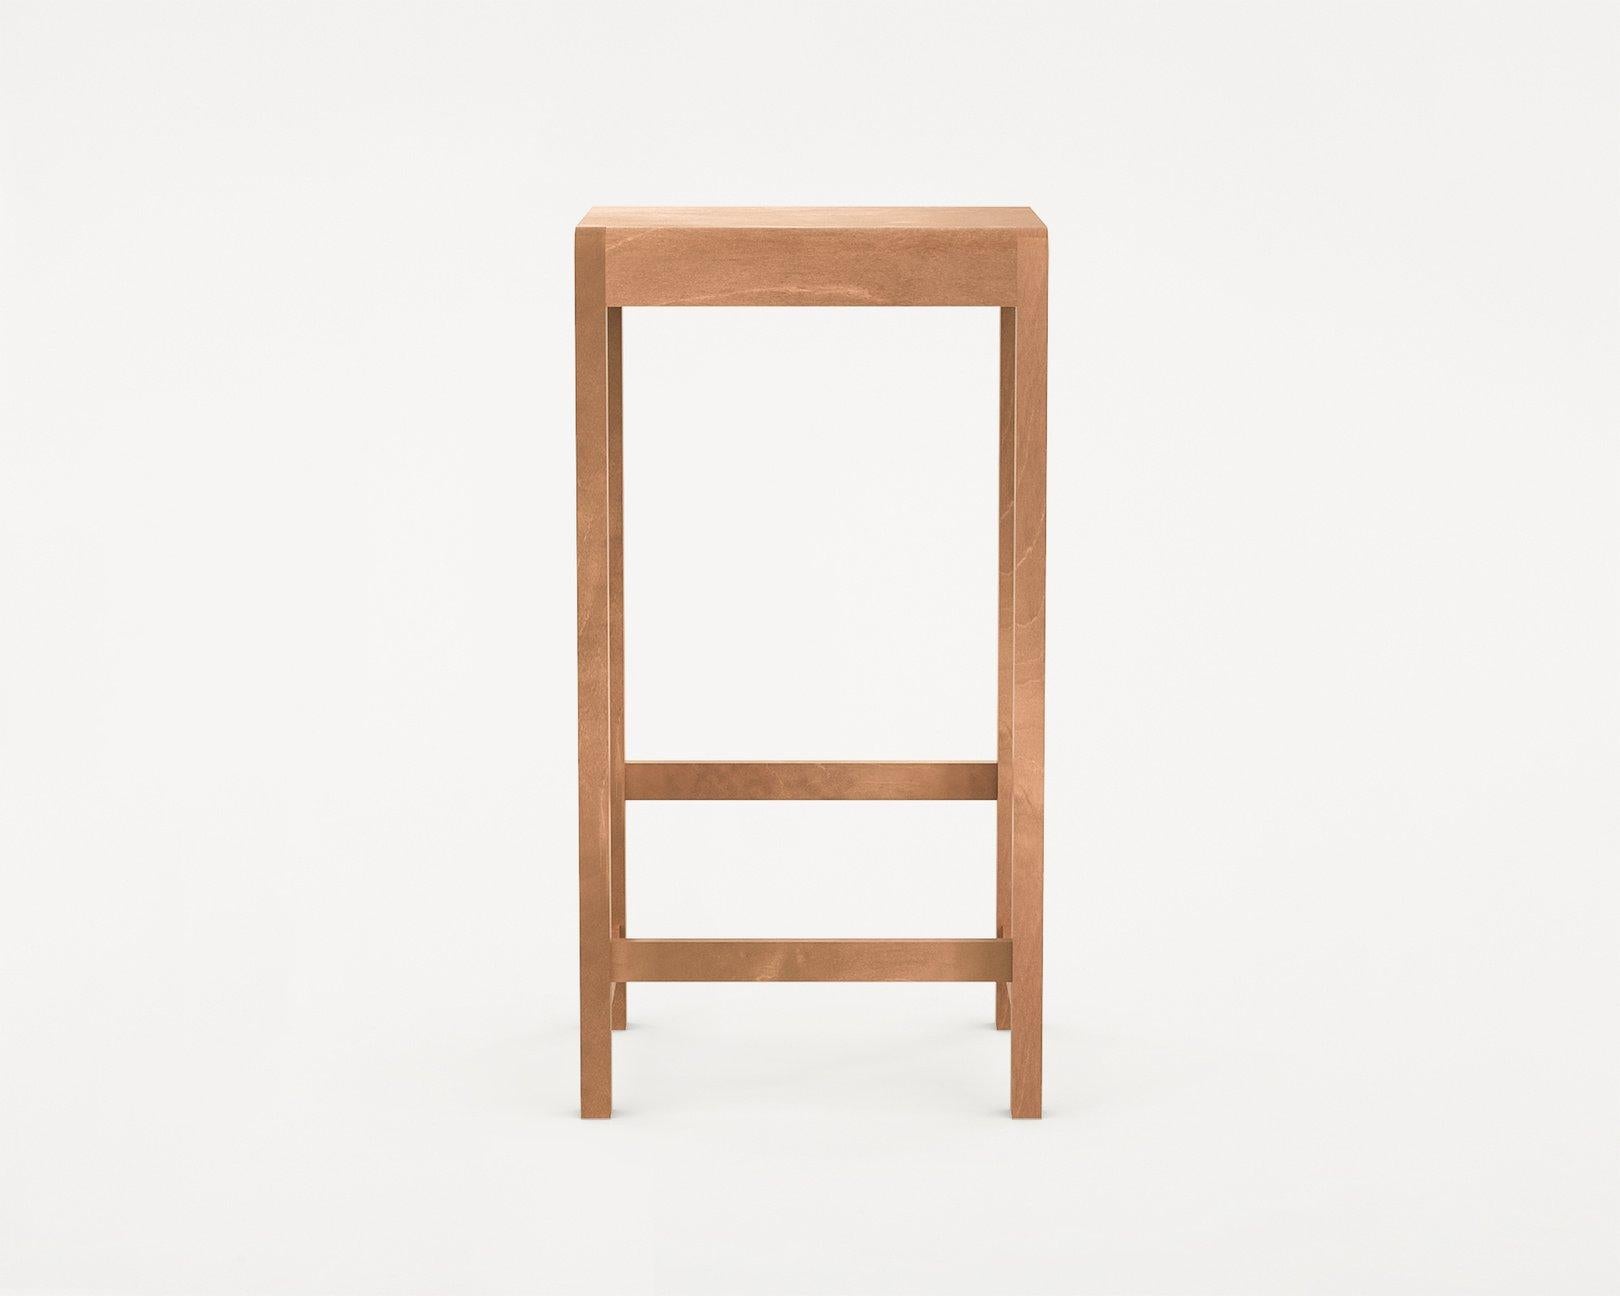 The 01 Series takes inspiration from chairs commonly found in Nordic churches since the early 20th century. The Stool 01 is a linear extension of this study, adapted for bars in modern spaces.

Premium grade, regionally sourced Baltic Birch subtly